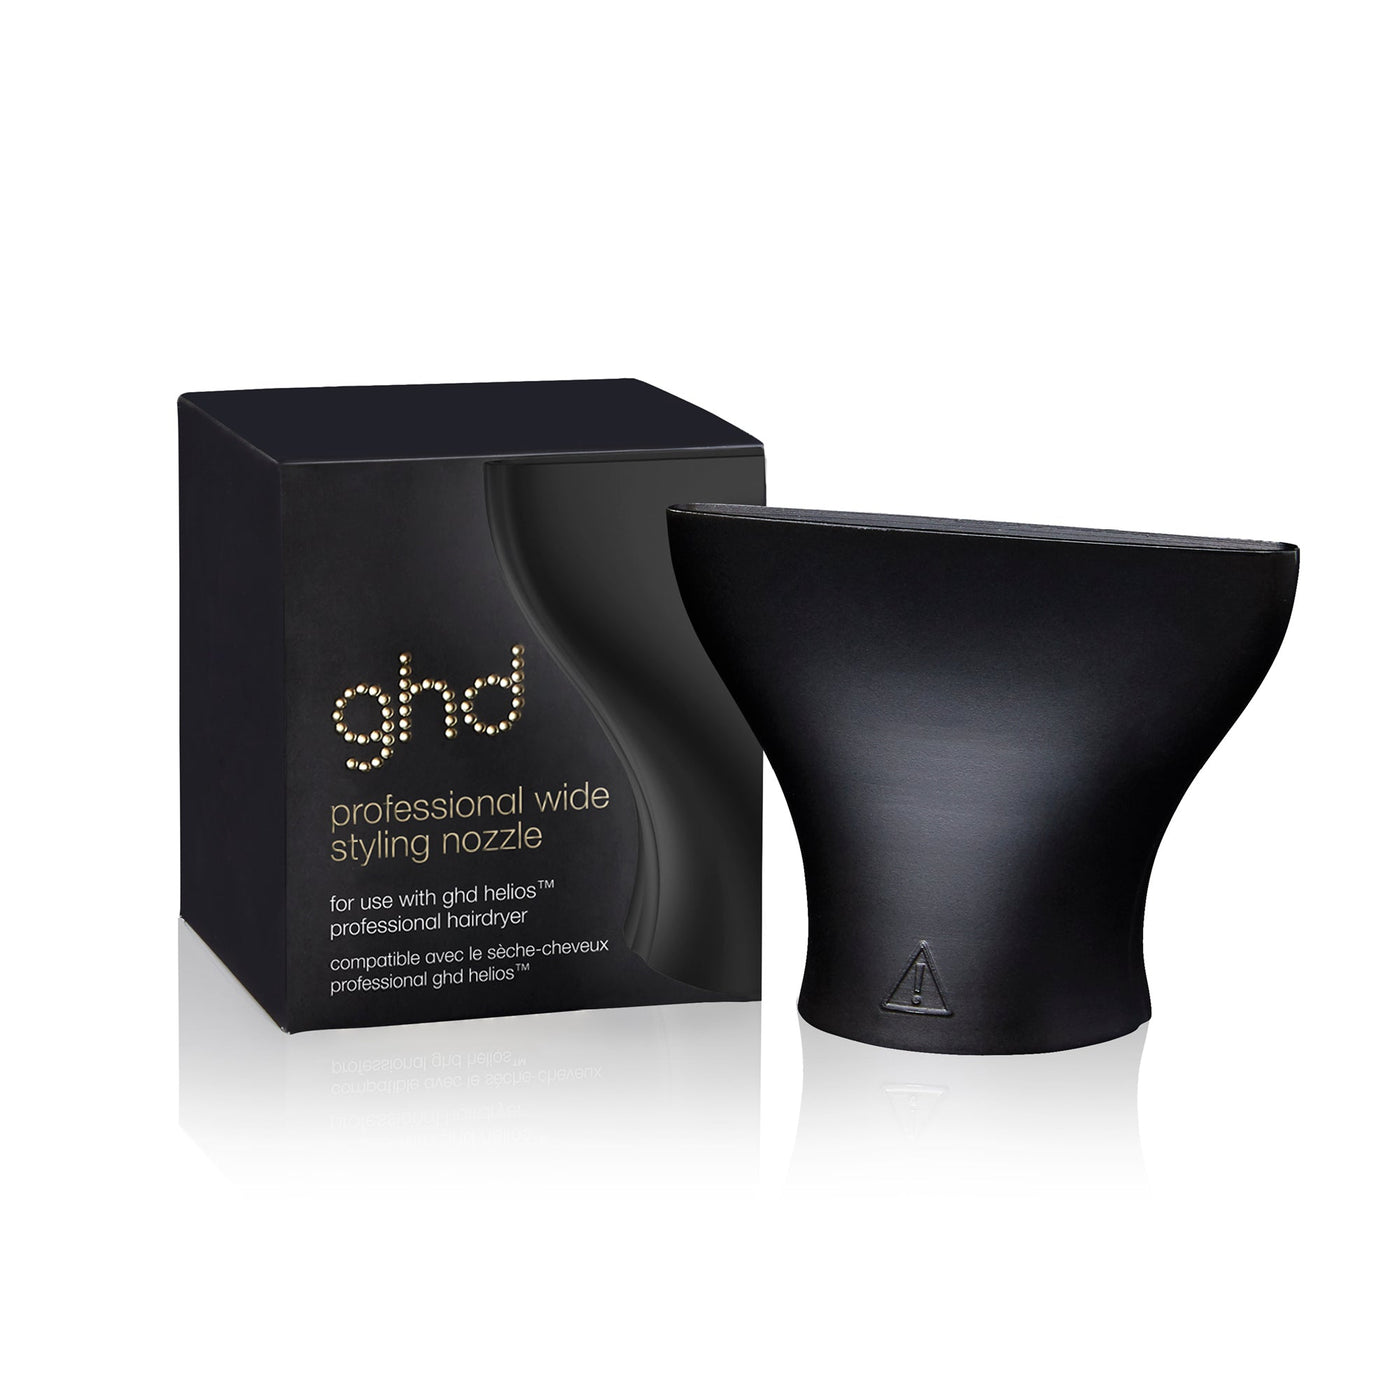 ghd Helios™ Wide Nozzle packaging